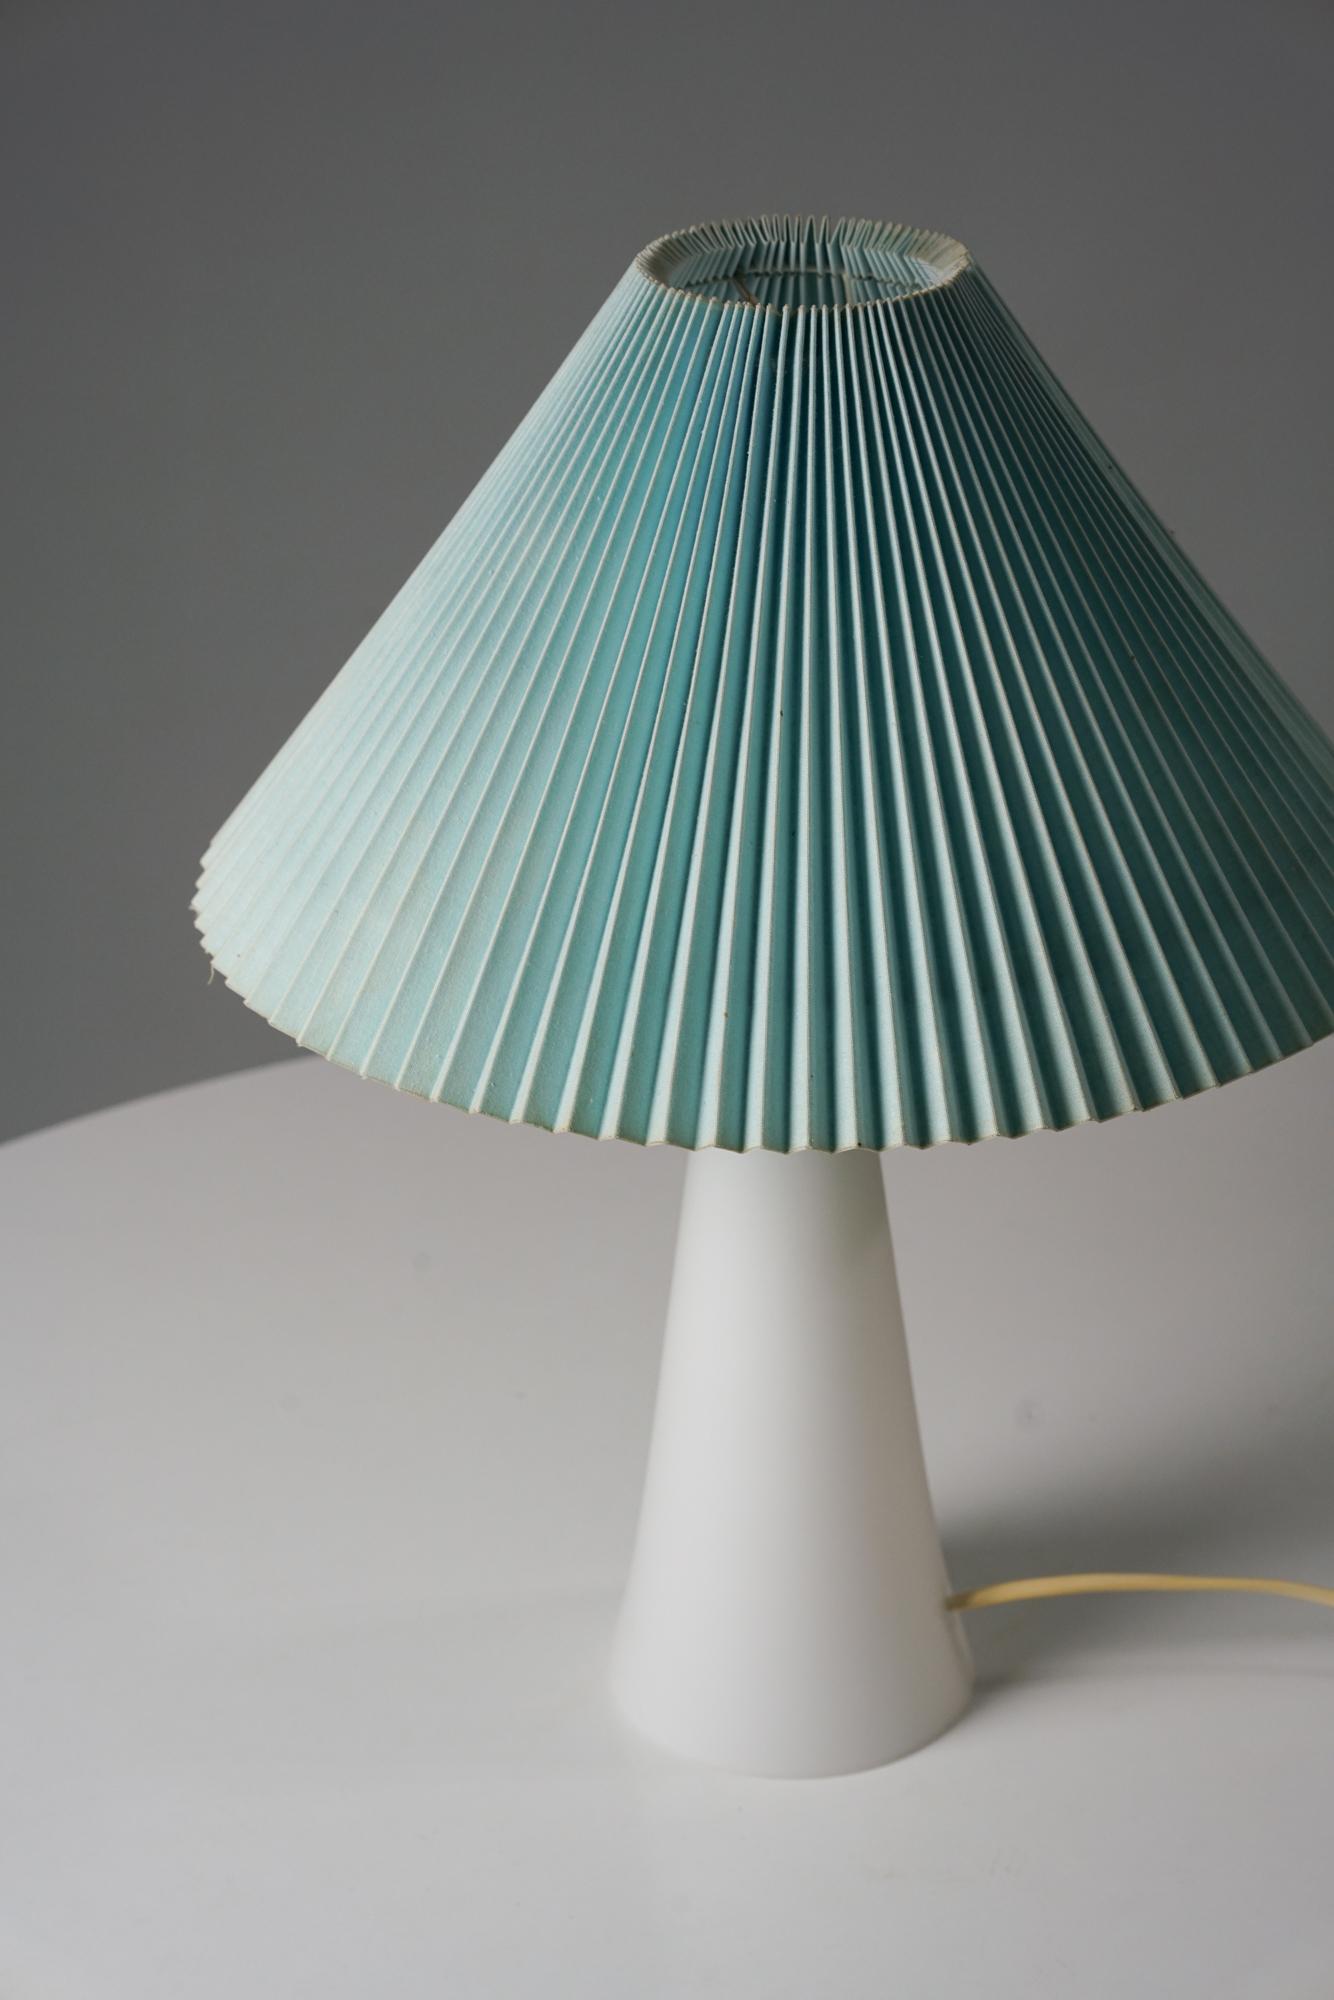 Glass table lamp by Lisa Johansson-Pape for Orno Oy from the 1950s. Glass frame with fabric lampshade. Good vintage condition, minor patina and wear consistent with age and use. Classic Scandinavian Modern piece by Lisa Johansson-Pape. 